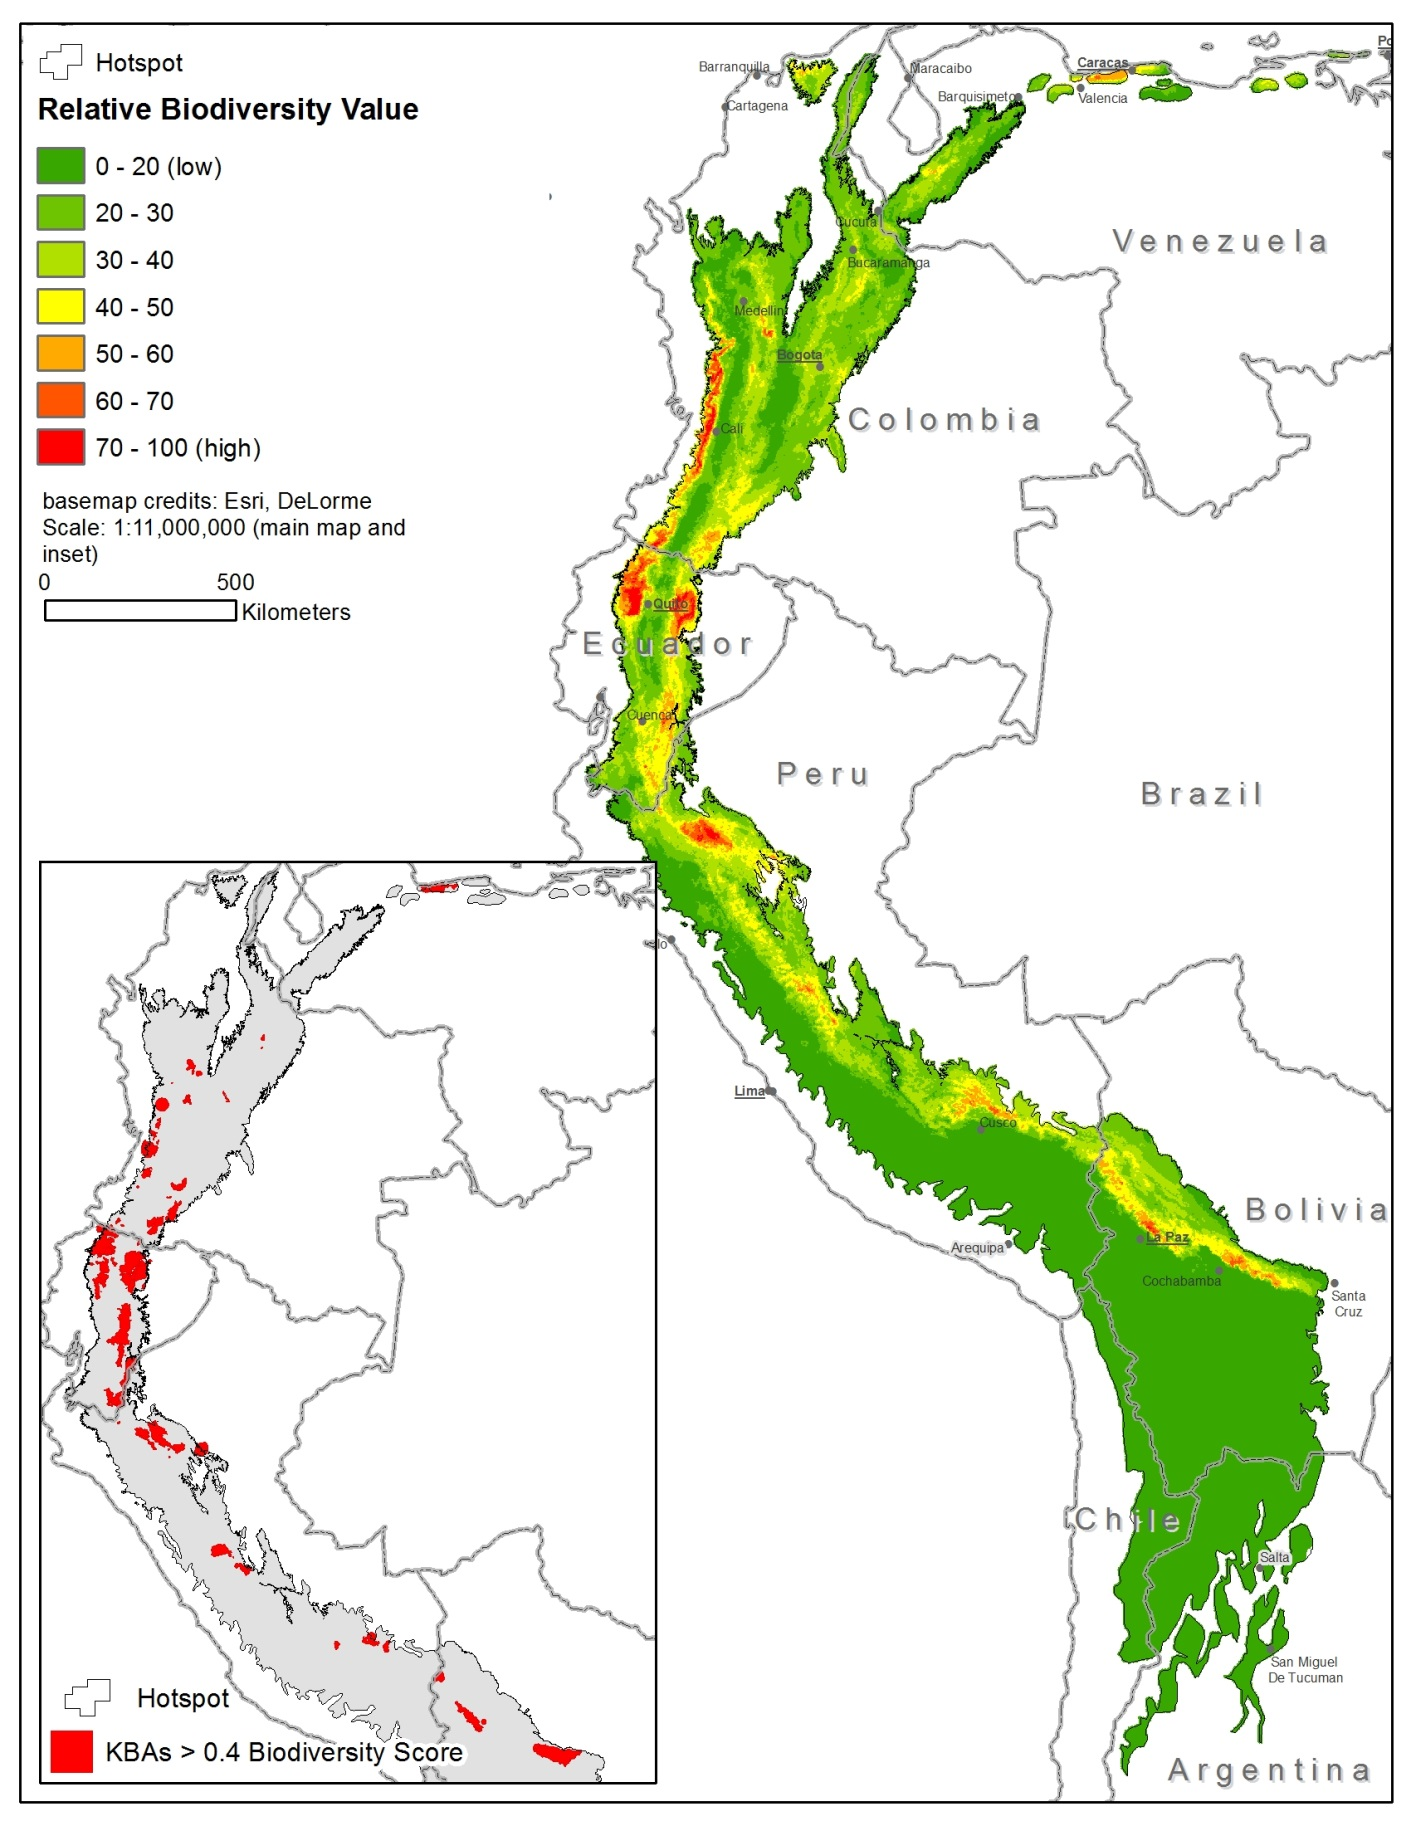 The ecosystem profile identifies the hotspot's Key Biodiversity Areas and their relative biodiversity value.